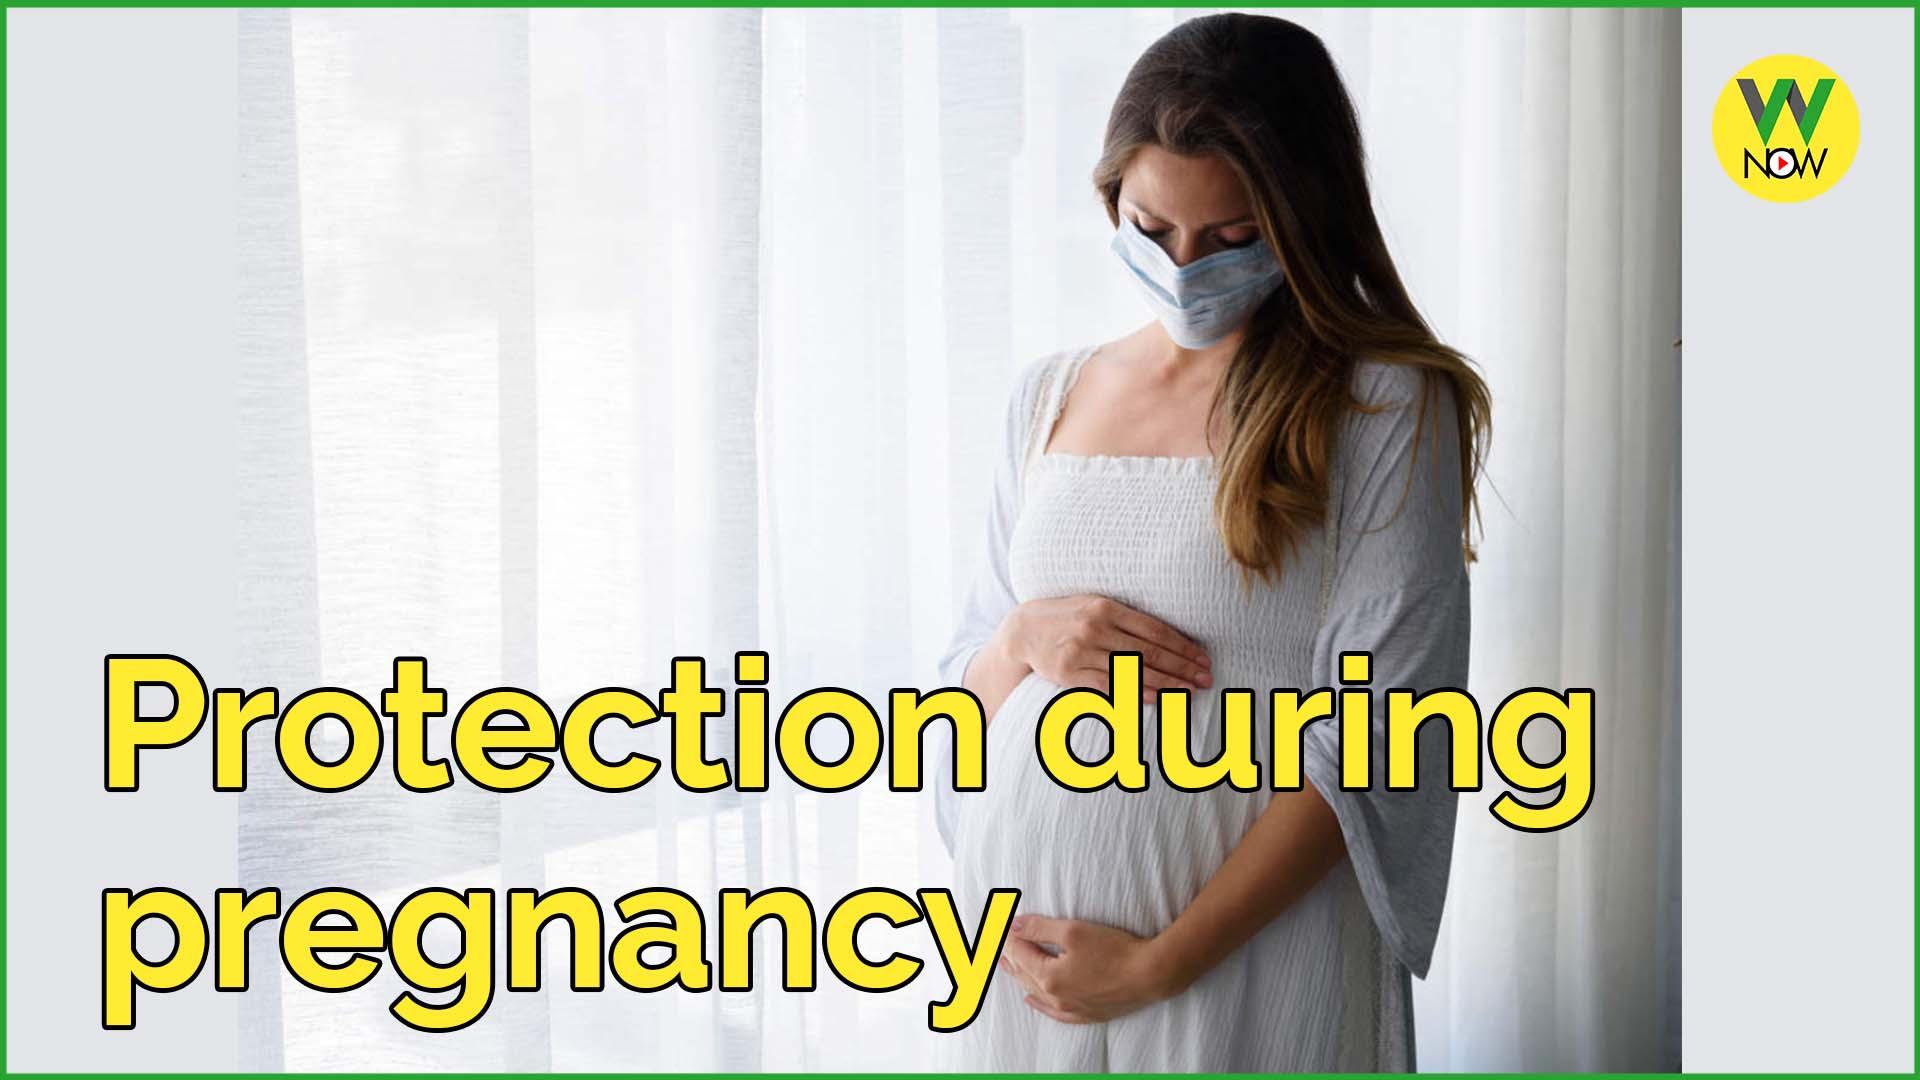 W NOW Protection during pregnancy